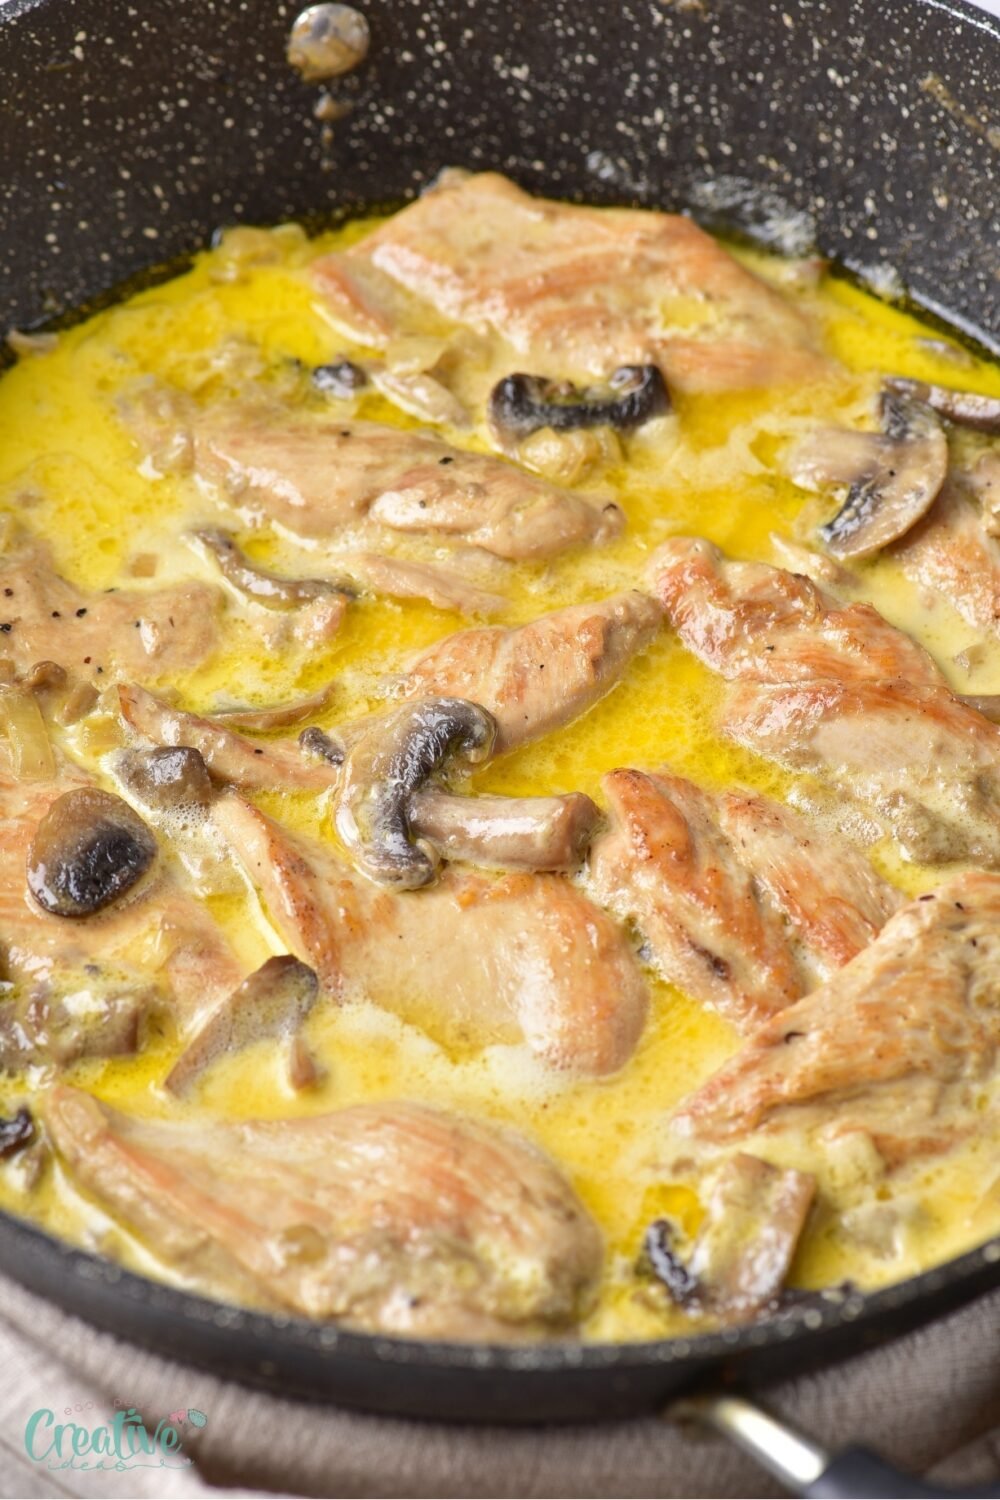 There are so many reasons to love this cream of mushroom chicken skillet! Check out the recipe!